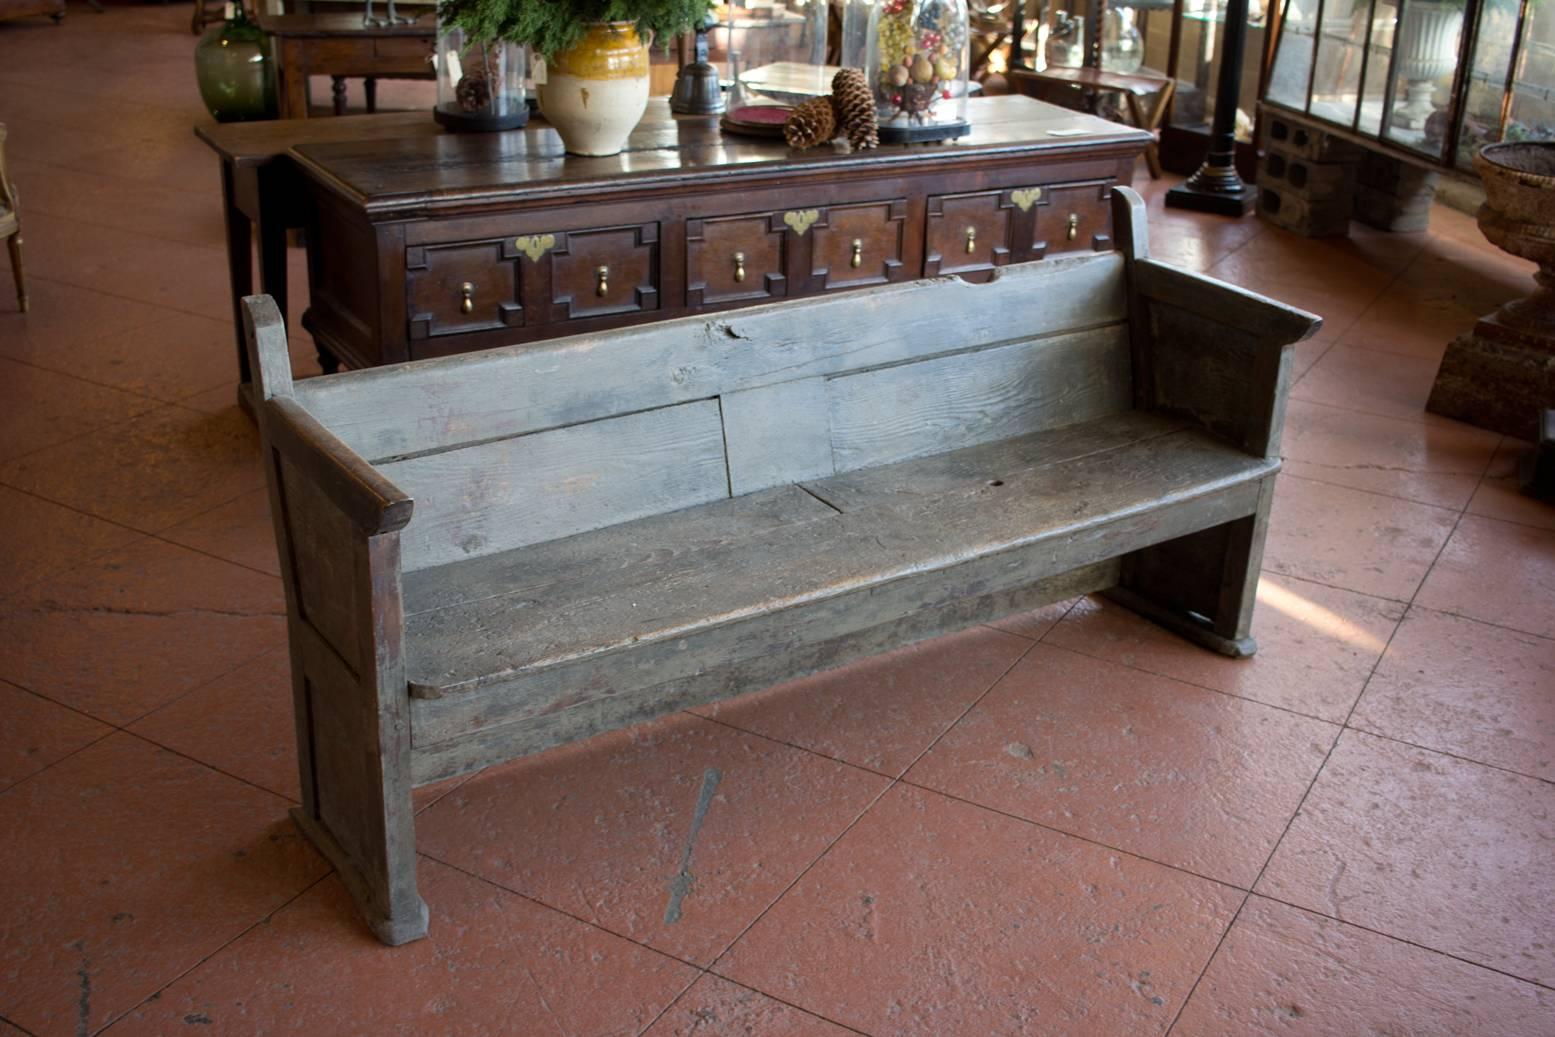 Rare 18th century rustic Spanish bench from the Catalonia area, with original paint. Wonderful shape and patina.

The height of the back is 28 inches and with the finials is 33 inches.